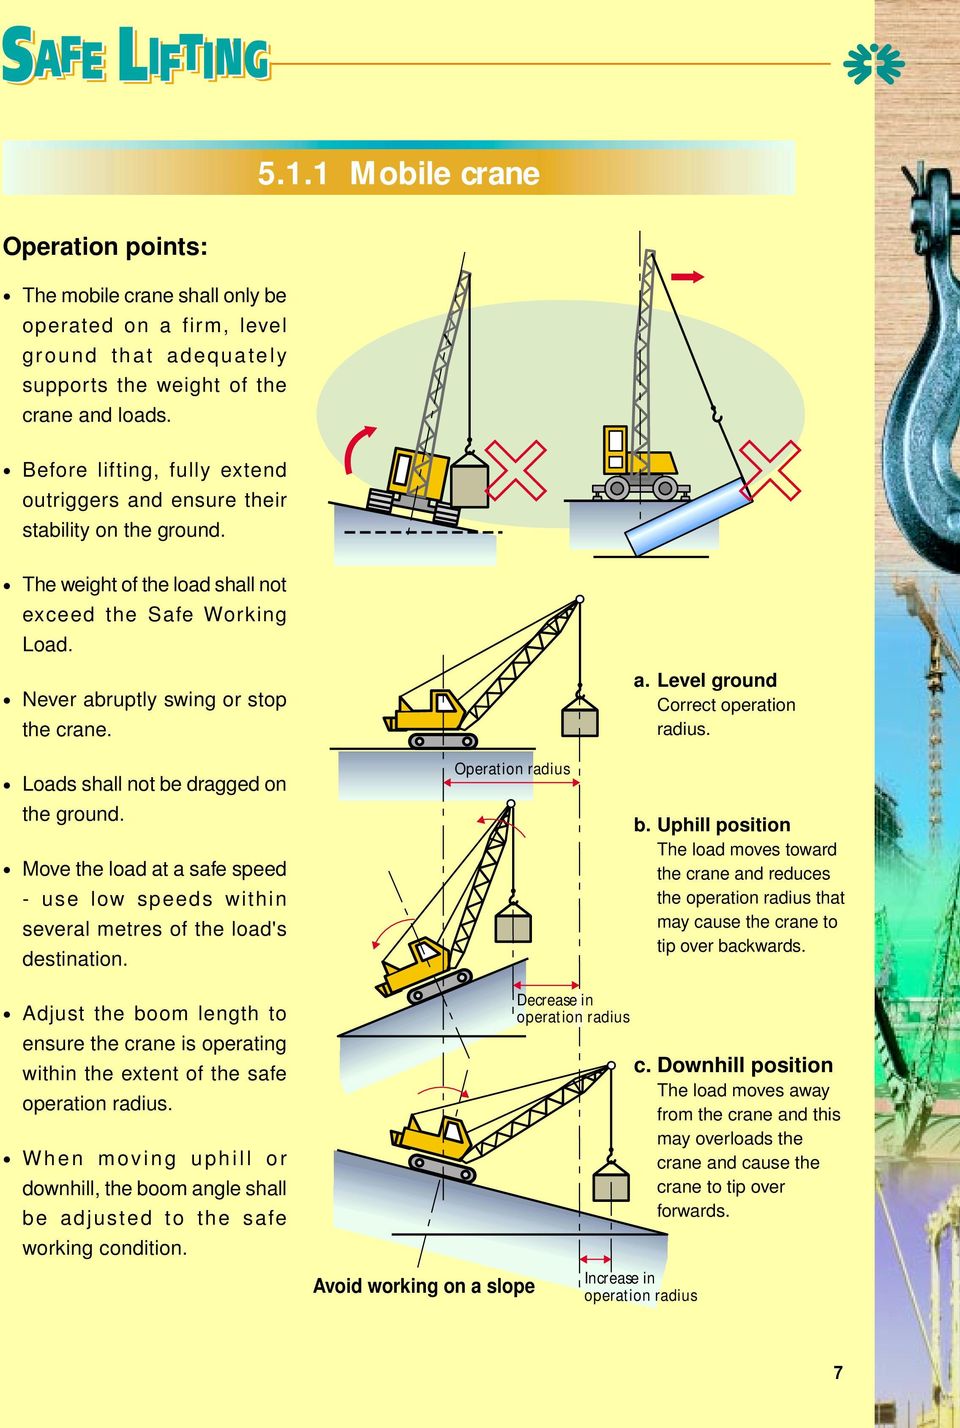 Loads shall not be dragged on the ground. Move the load at a safe speed - use low speeds within several metres of the load's destination. Operation radius a. Level ground Correct operation radius. b. Uphill position The load moves toward the crane and reduces the operation radius that may cause the crane to tip over backwards.